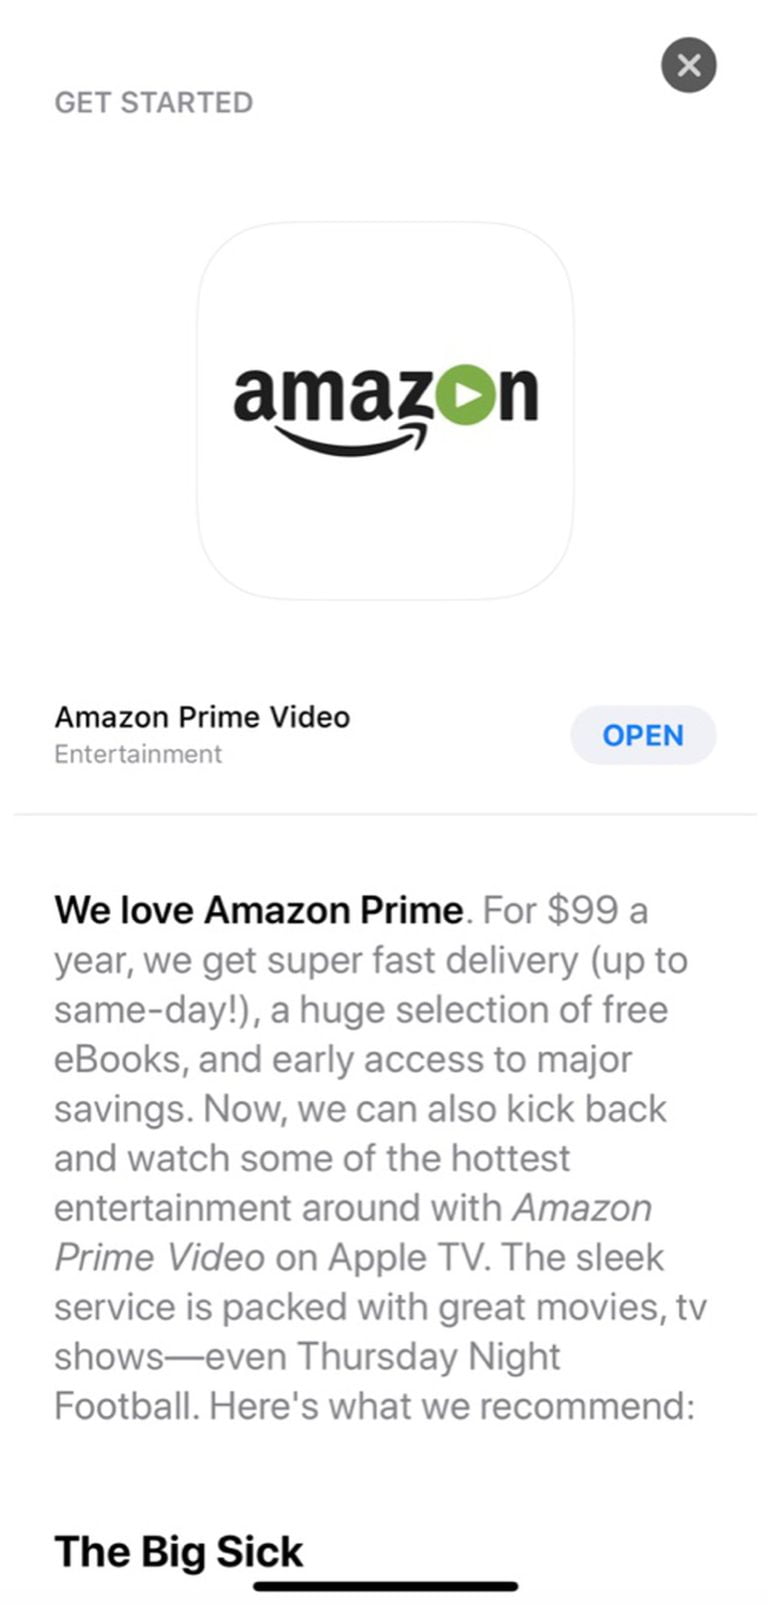 Now, Amazon Prime Video is available for Apple TV